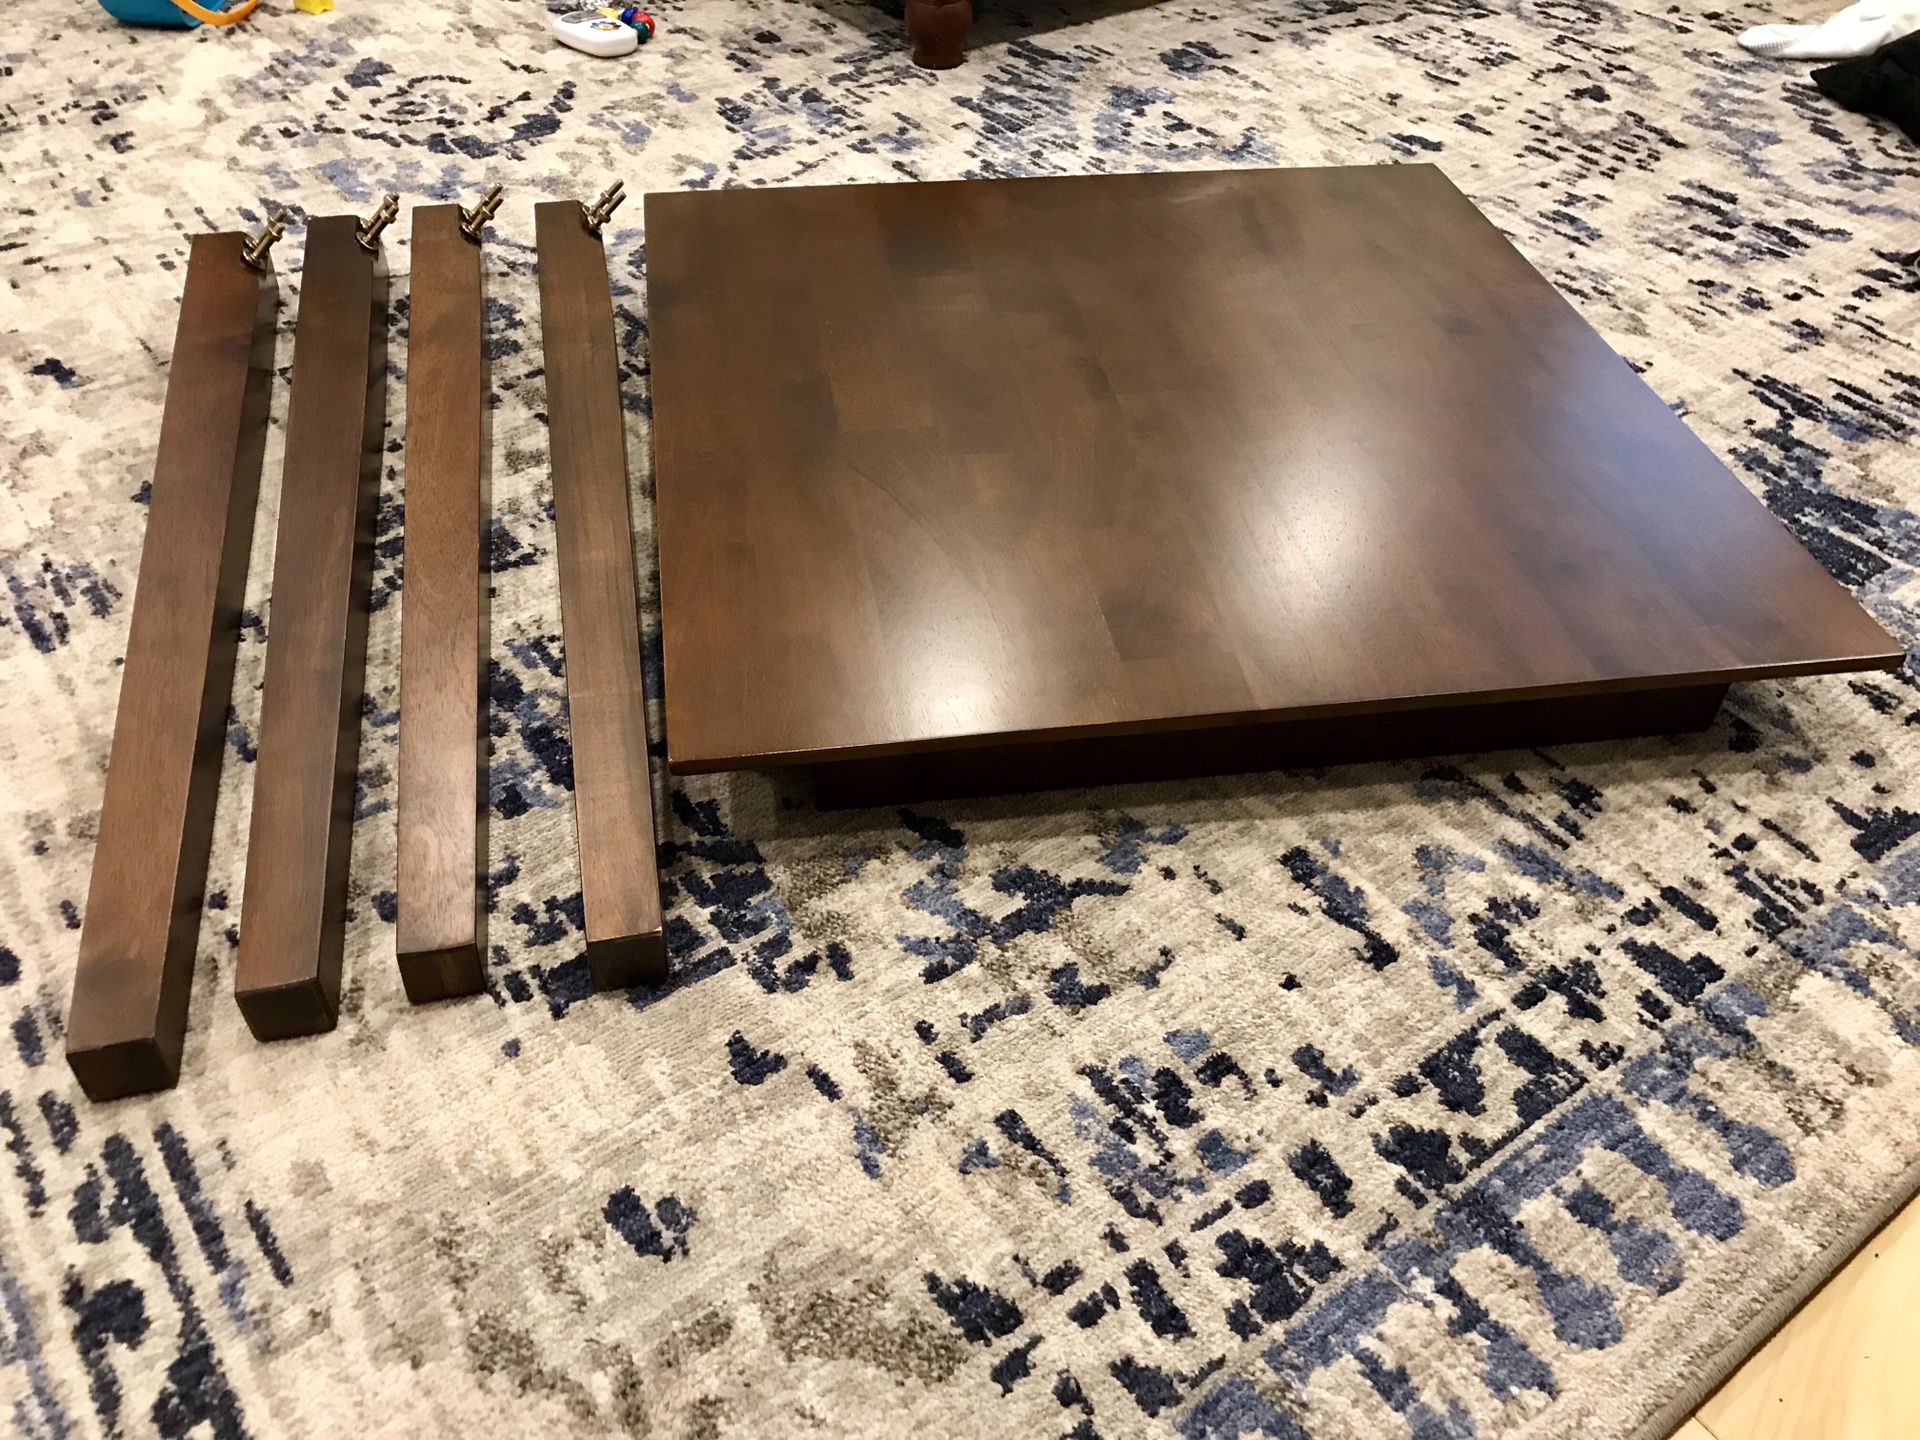 Table only - Wayfair 30x30x36 Wooden Table